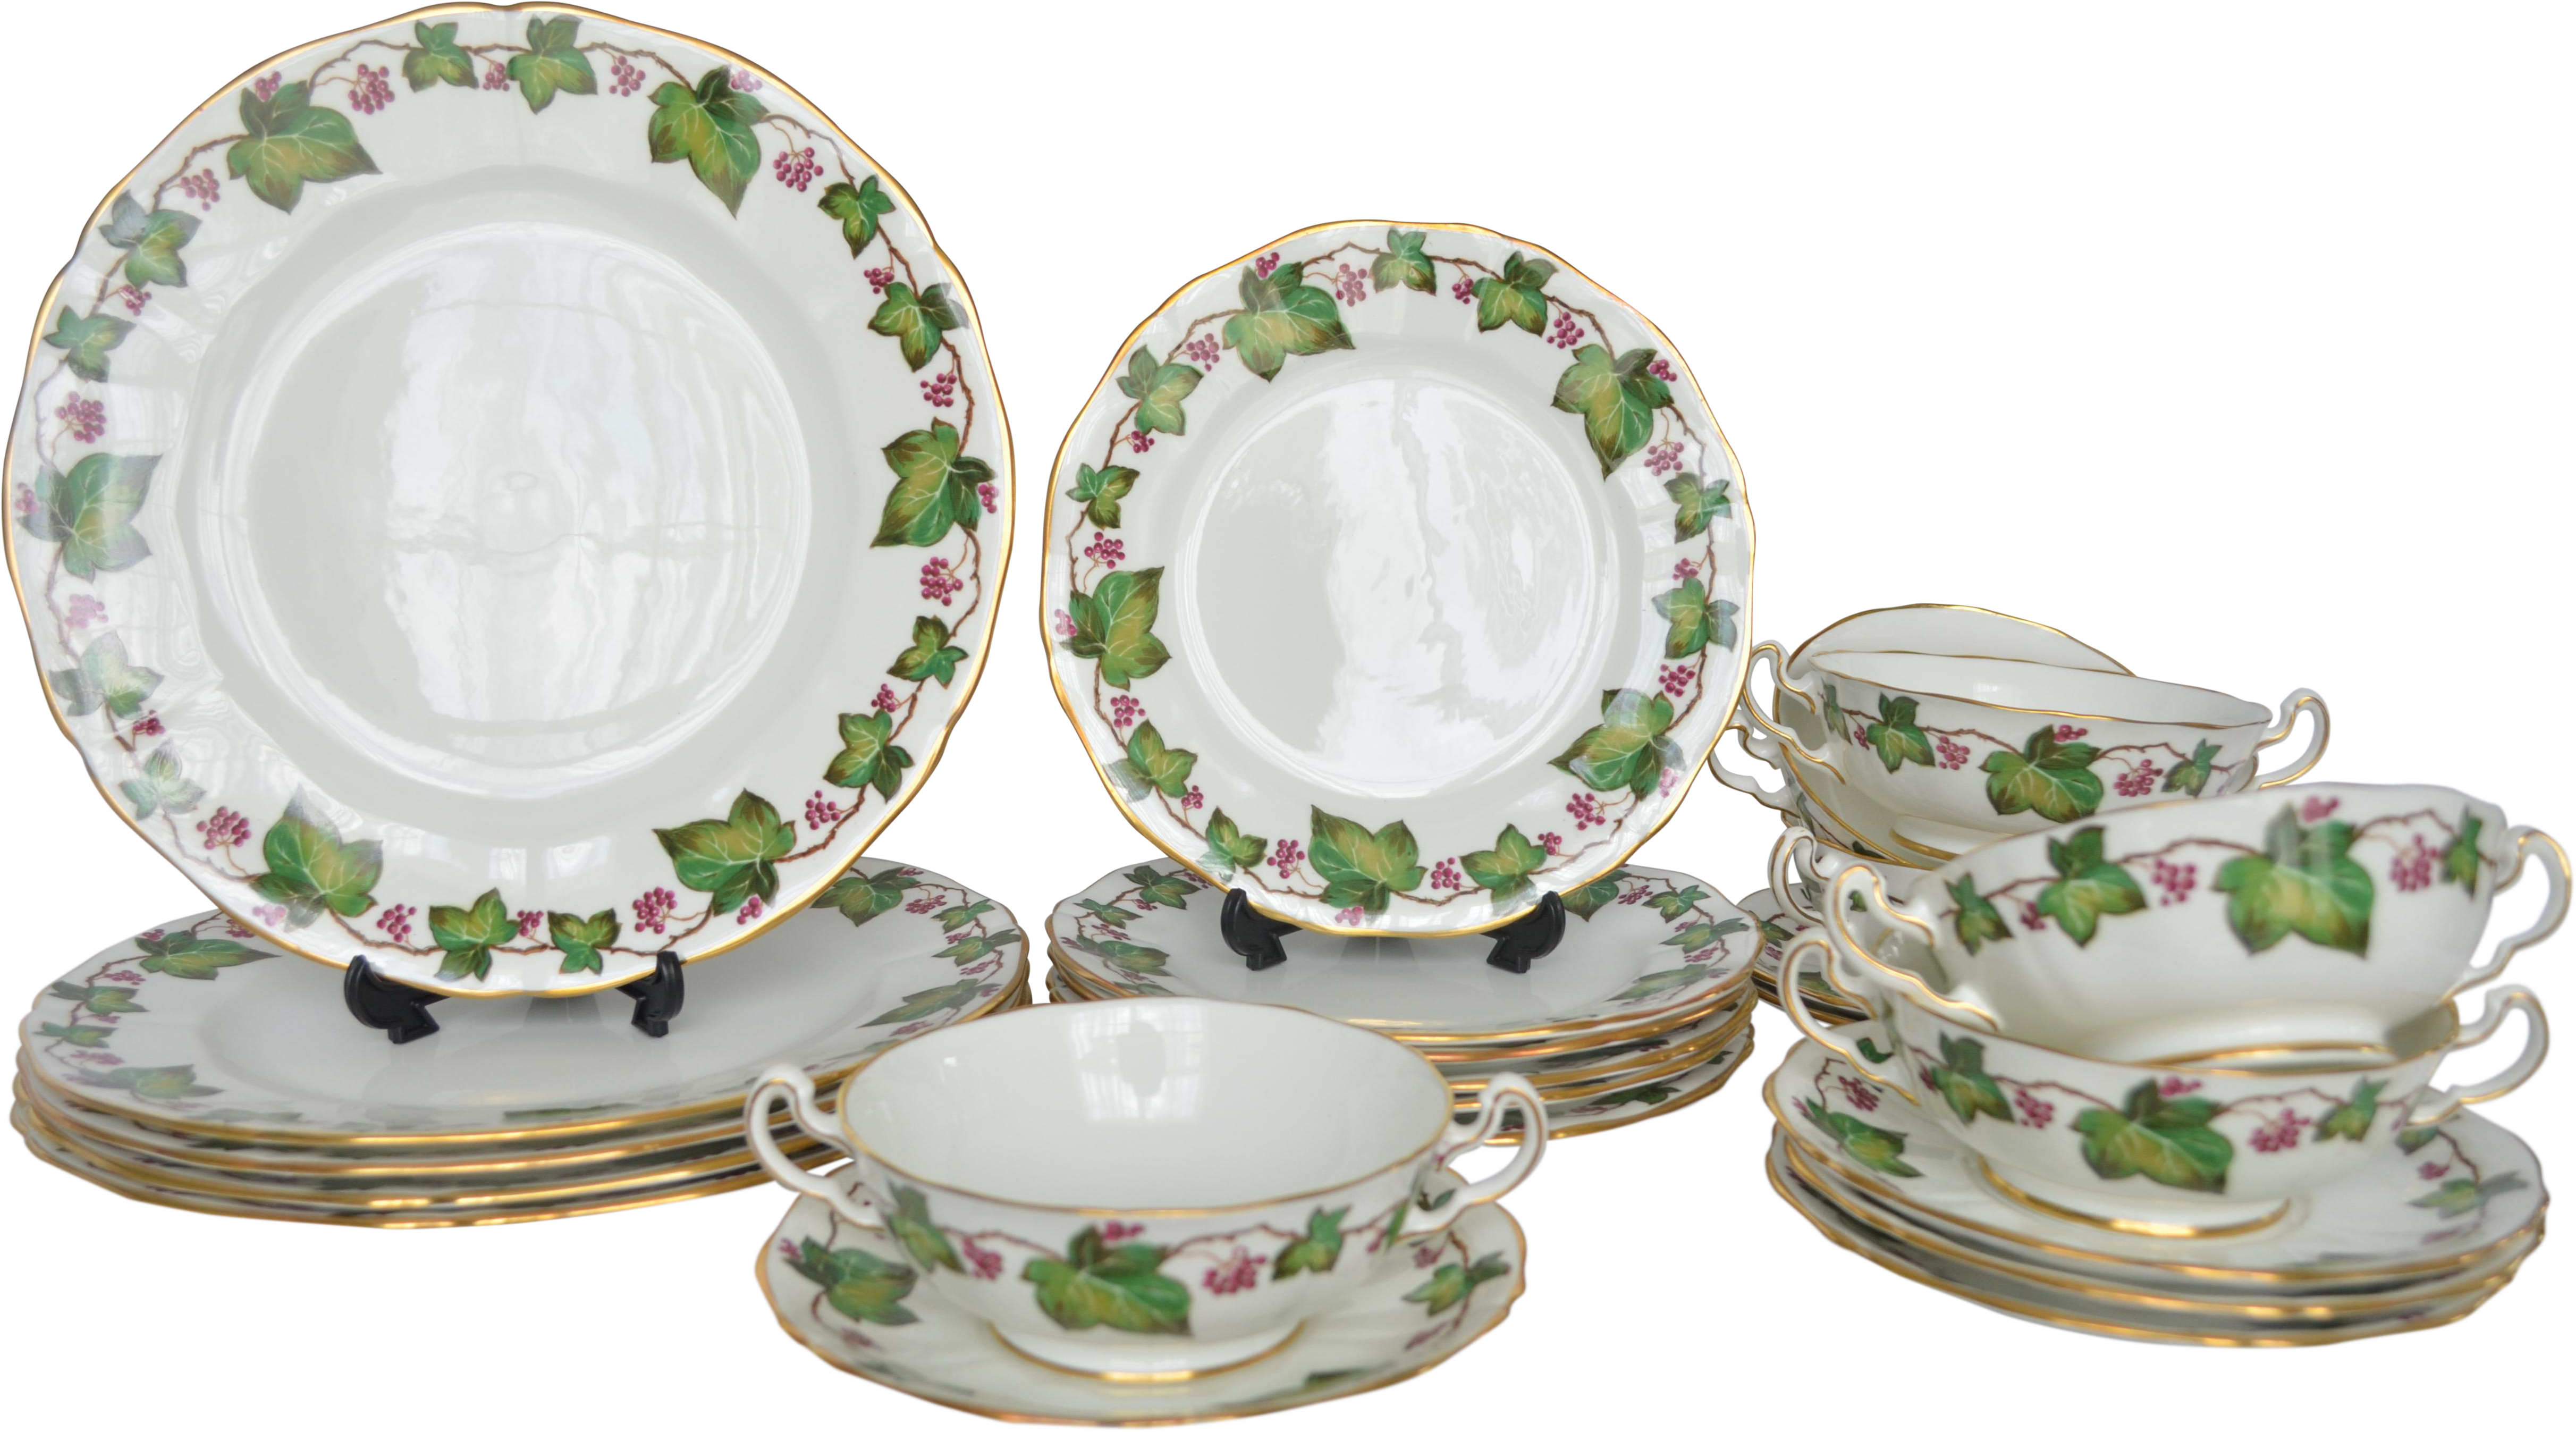 A Group Of Plates And Cups